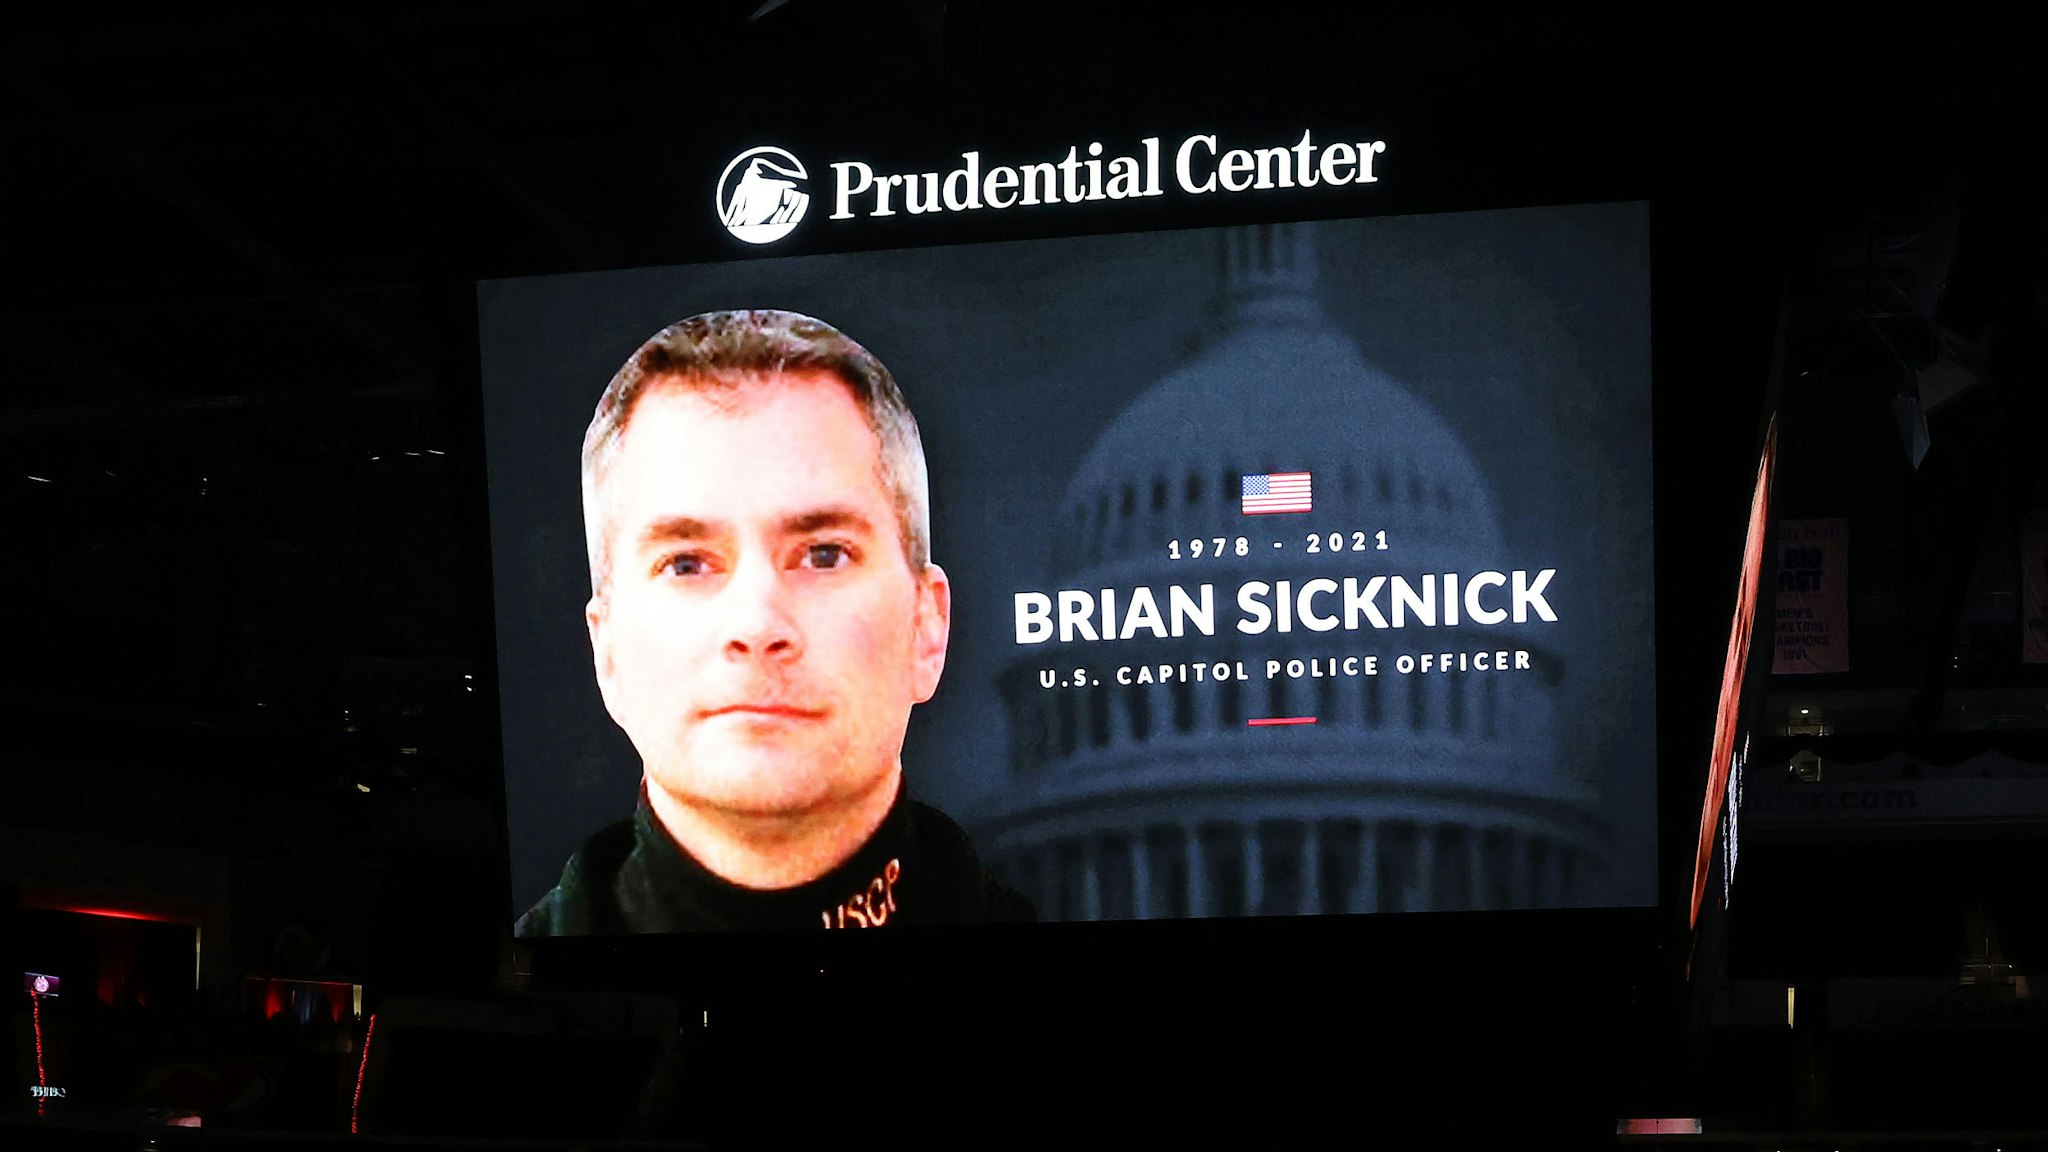 NEWARK, NEW JERSEY - JANUARY 14: The New Jersey Devils honor slain Capitol police officer and New Jersey native Brian Sicknick before the game between the New Jersey Devils and the Boston Bruins during the home opening game at Prudential Center on January 14, 2021 in Newark, New Jersey.